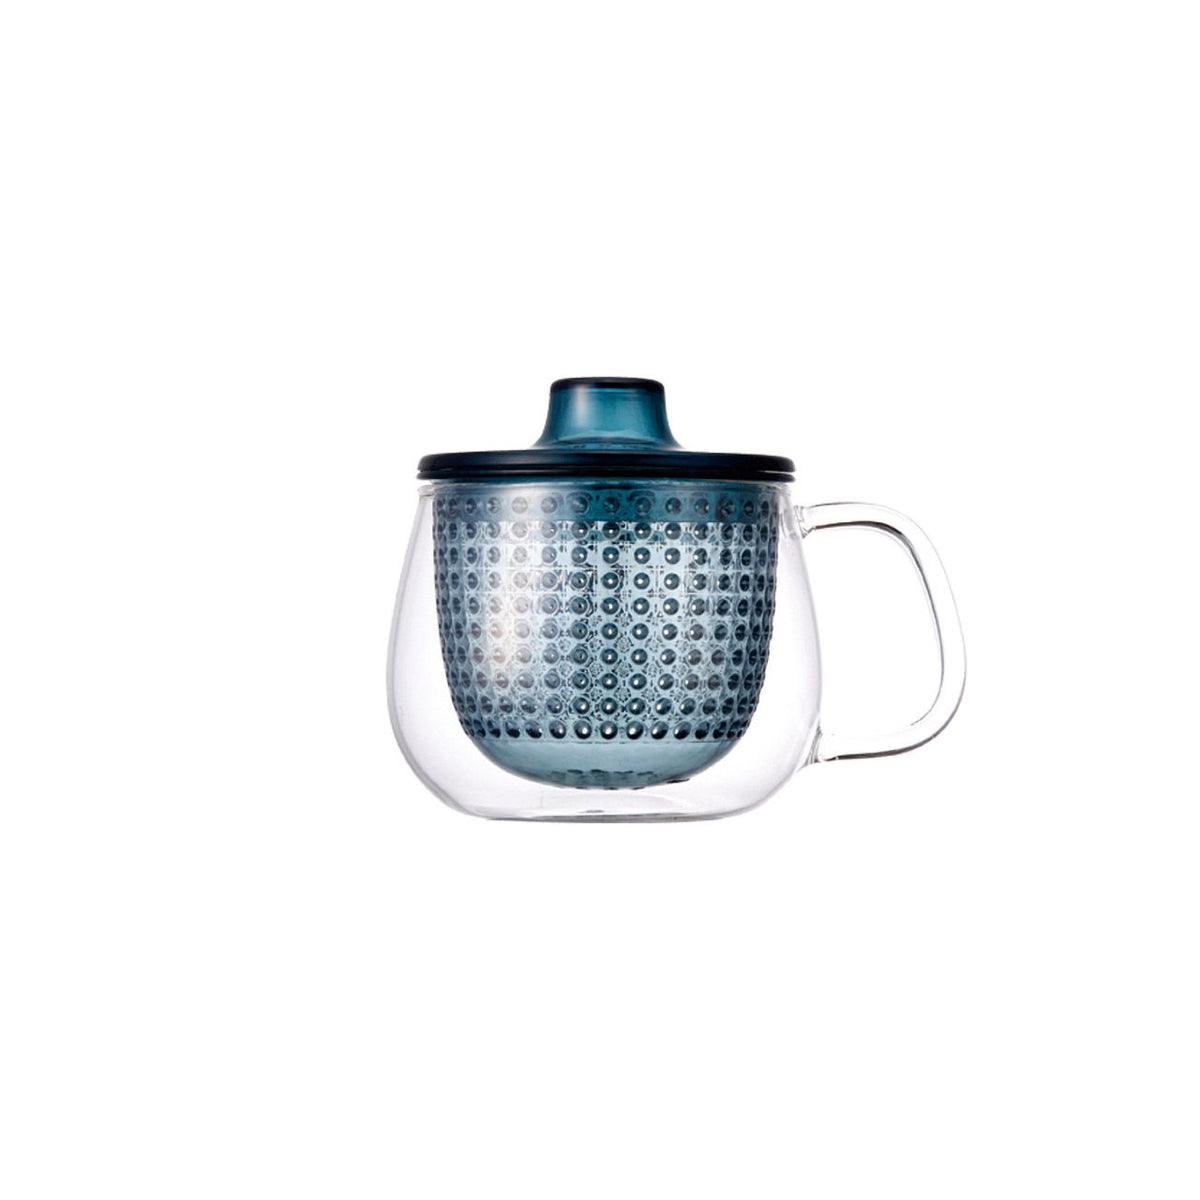 UNIMUG glass teapot in  blue for loose leaf tea by The Rabbit Hole